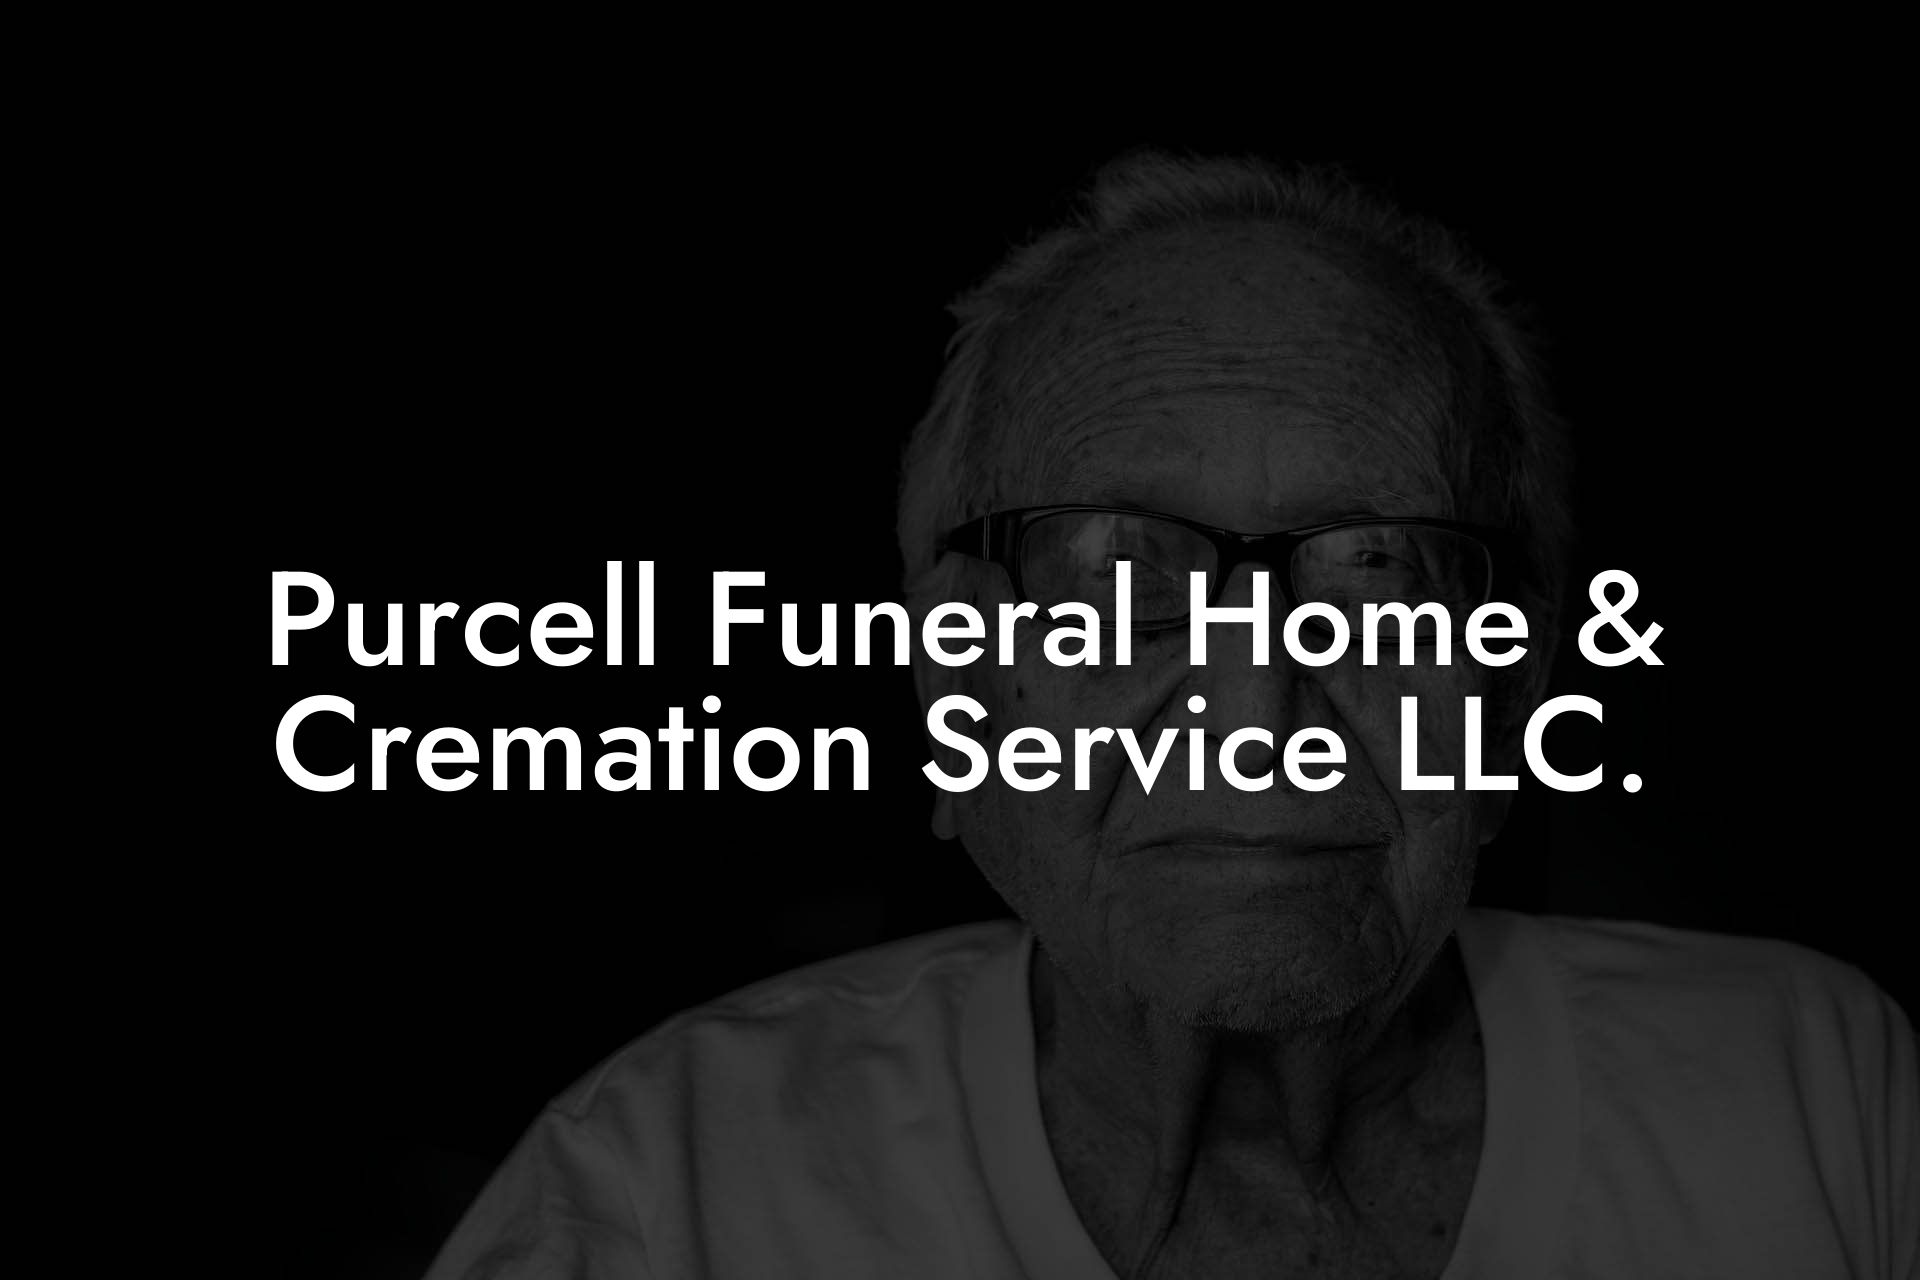 Purcell Funeral Home & Cremation Service LLC.